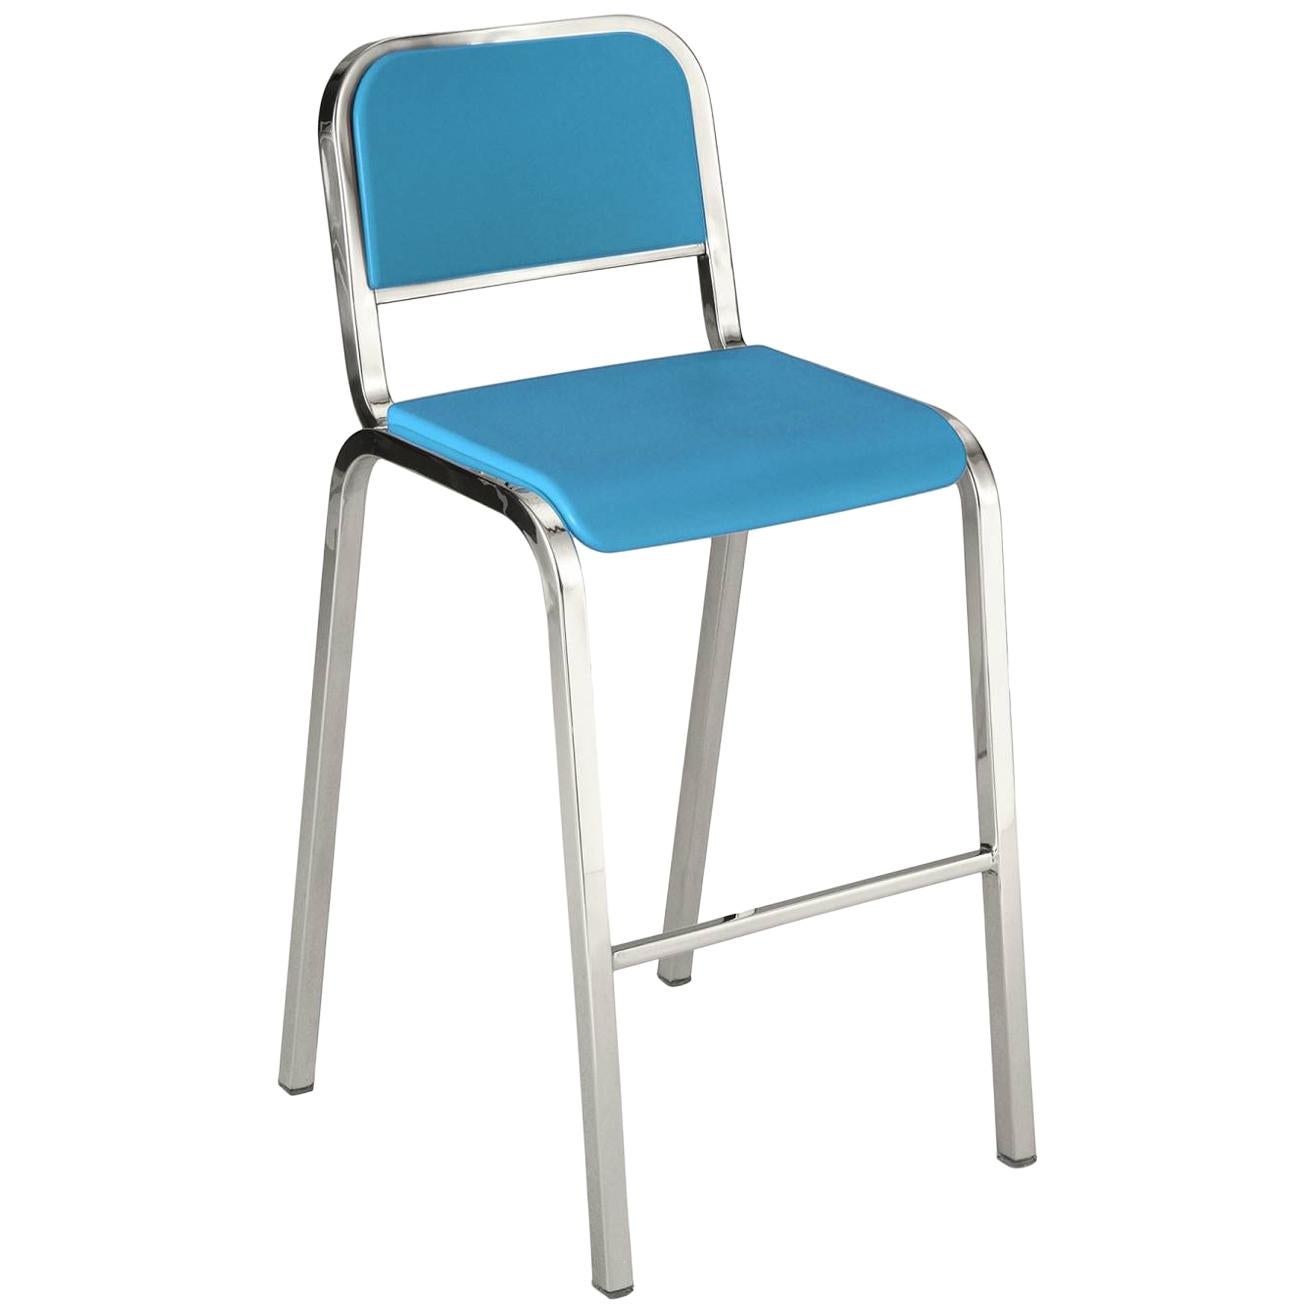 Emeco Nine-0 Barstool in Polished Aluminum and Blue by Ettore Sottsass